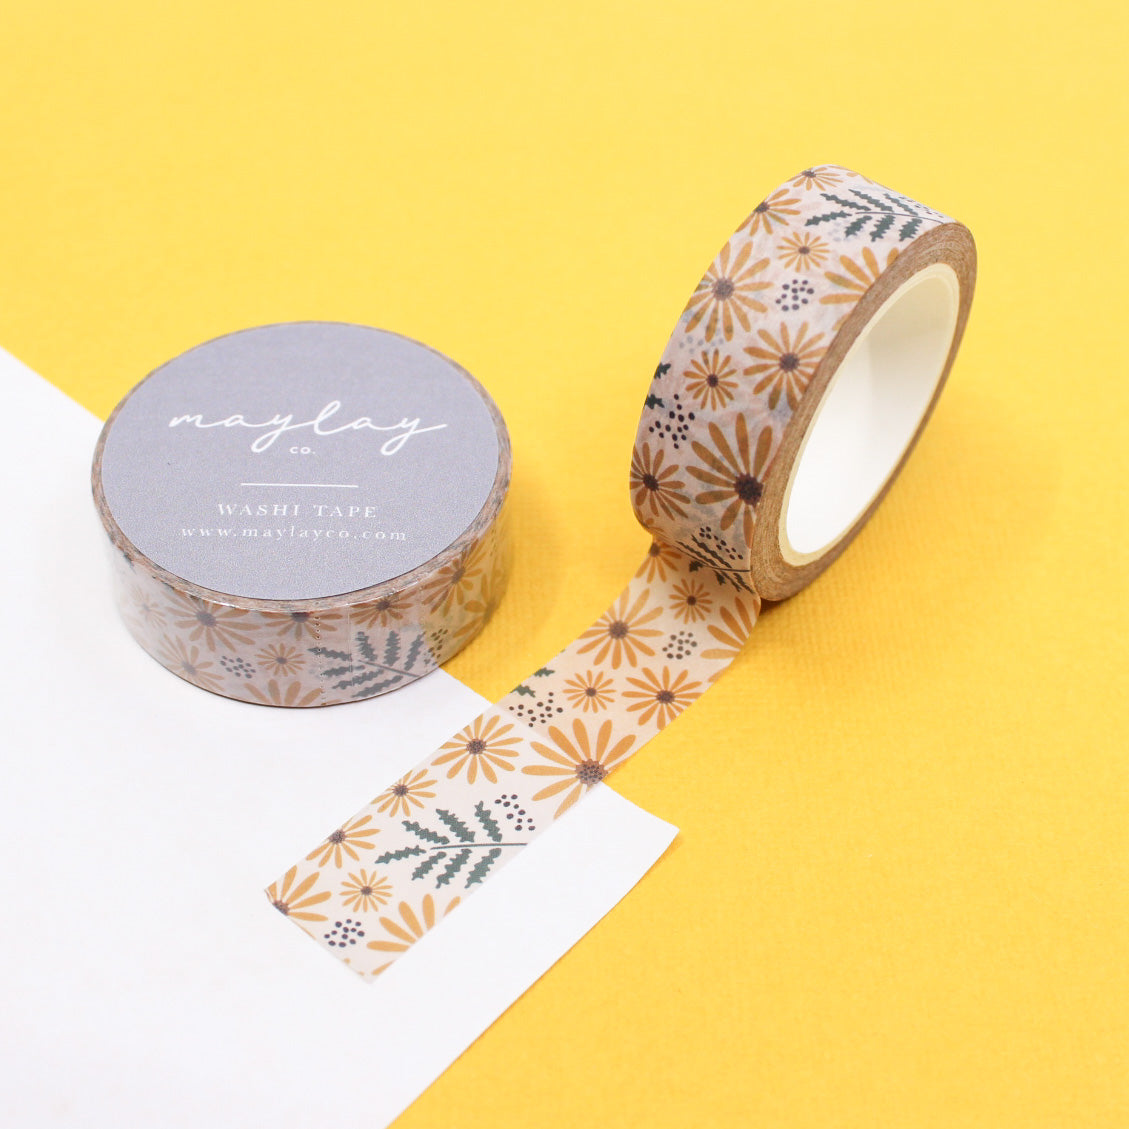 Country Heart Washi Tape With Gold Foil - XOXO Birdie